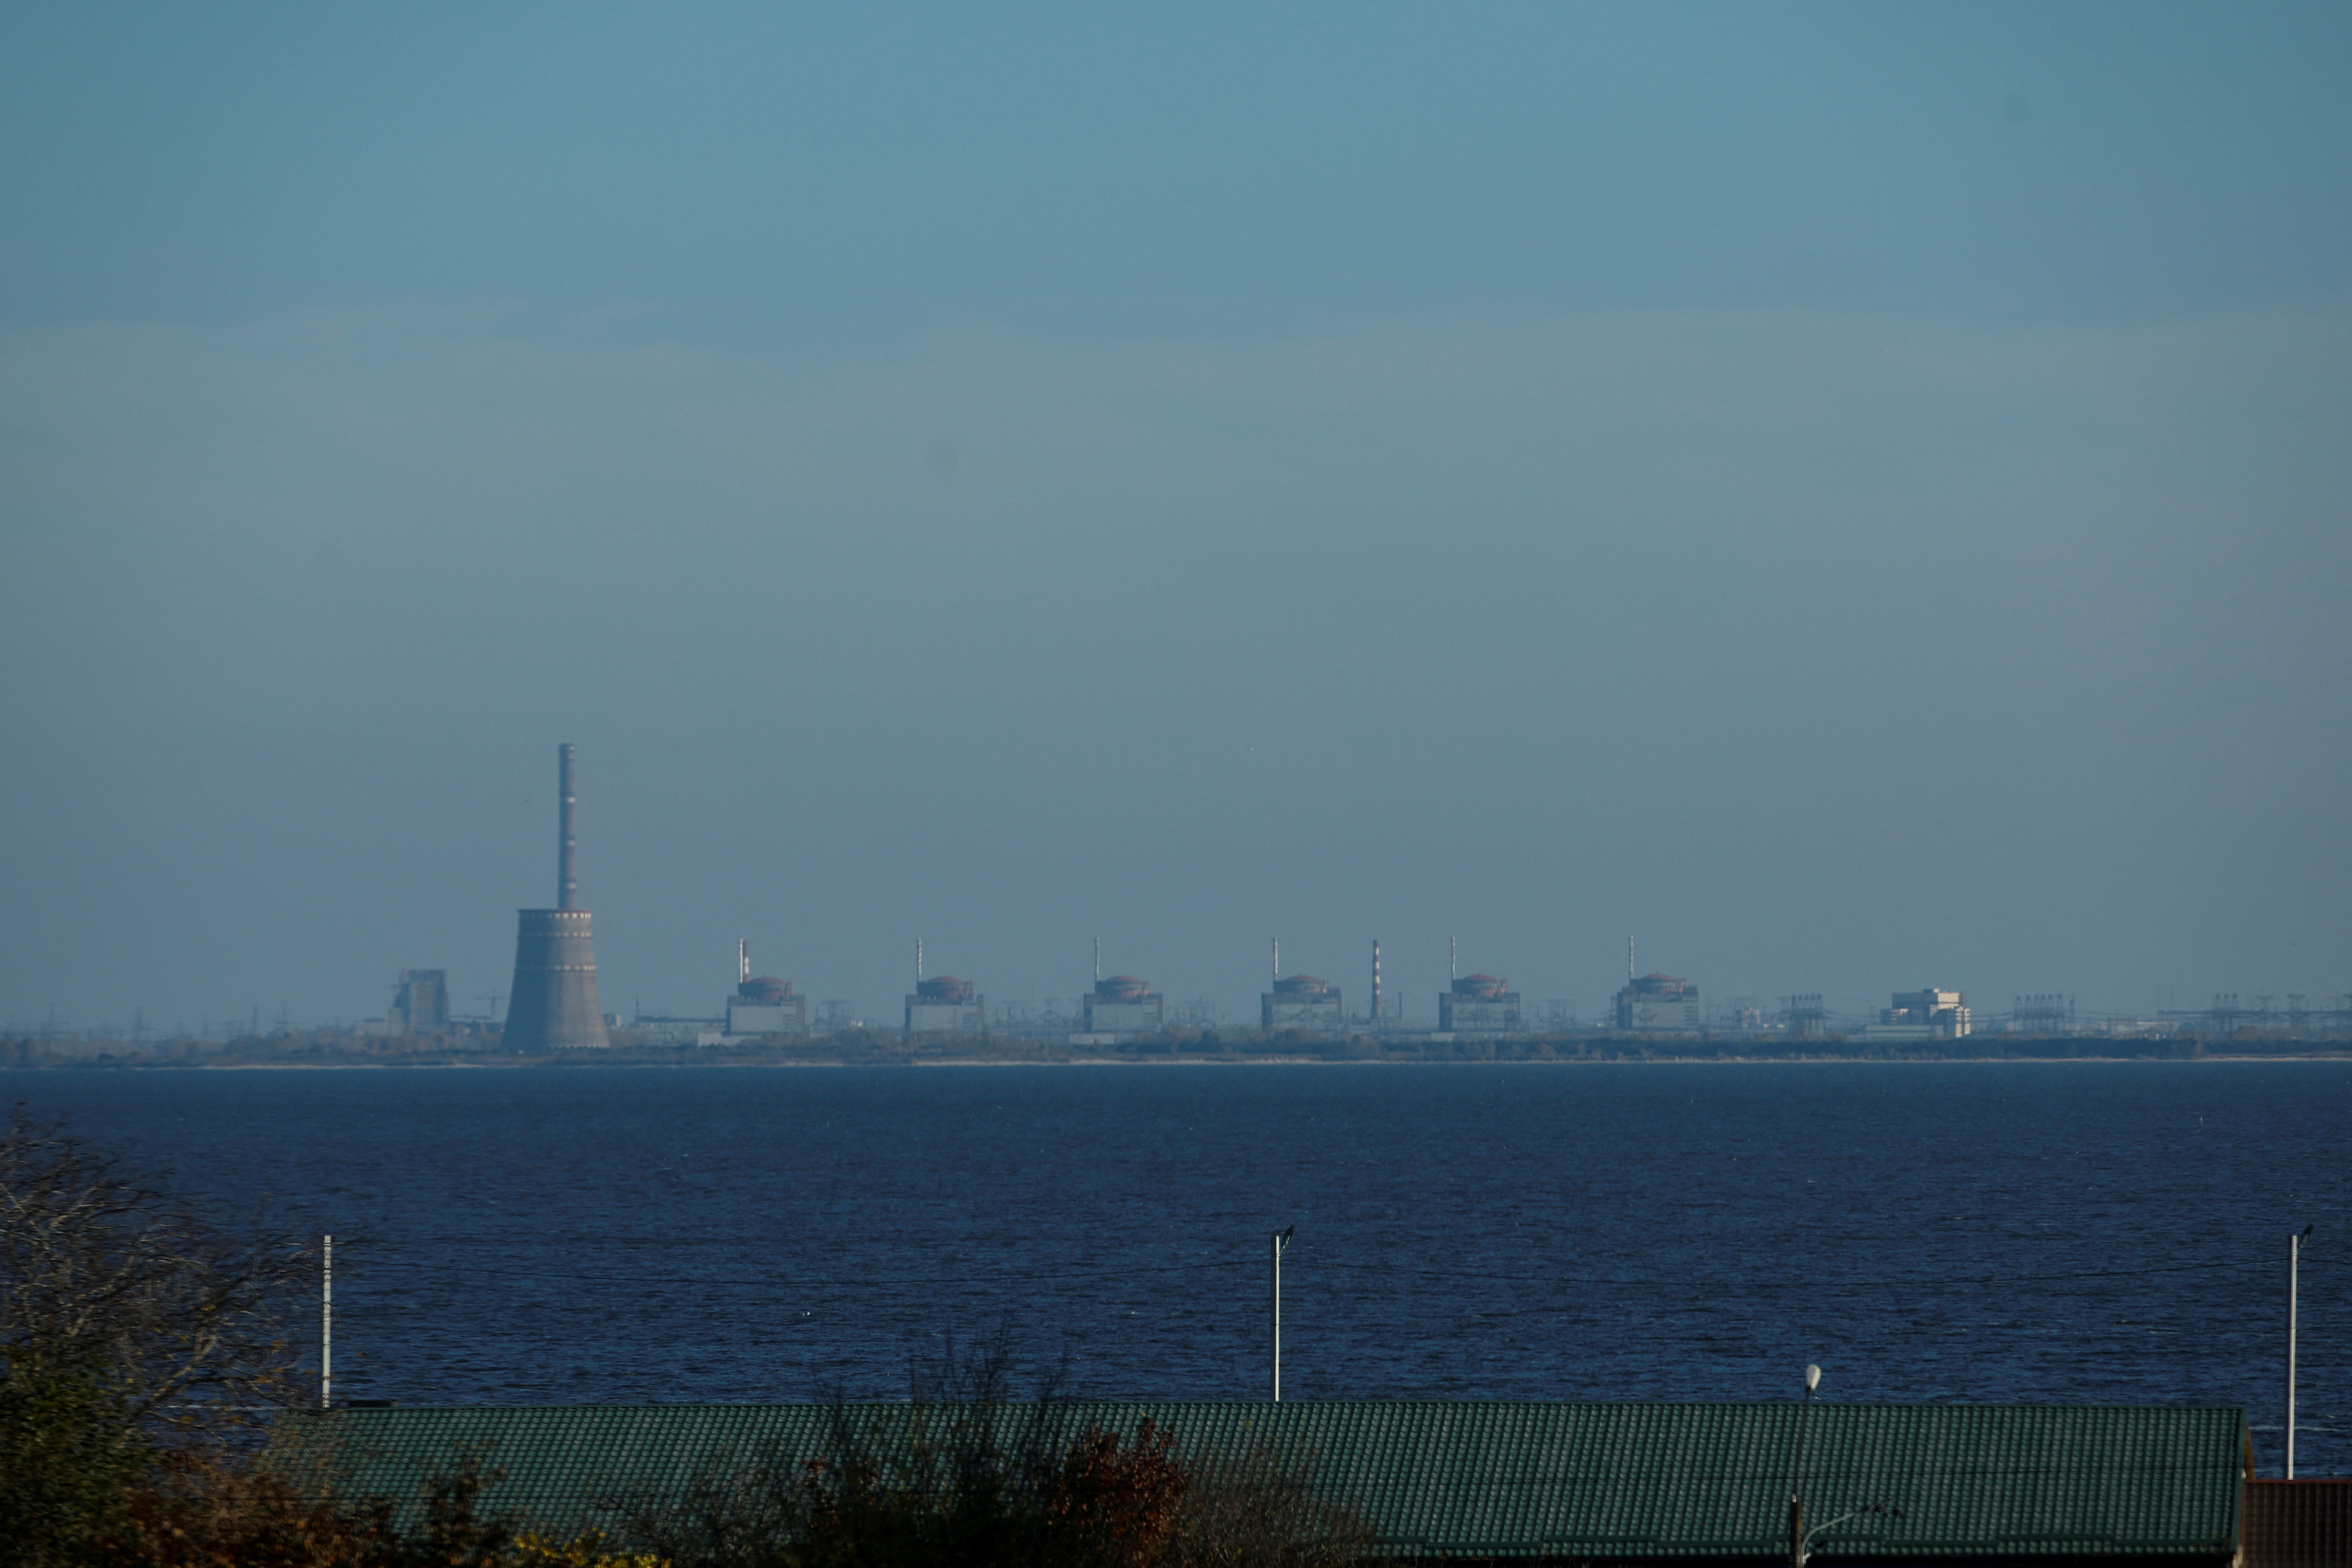 Visual shows Zaporizhzhya nuclear power plant from the city of Nikopol